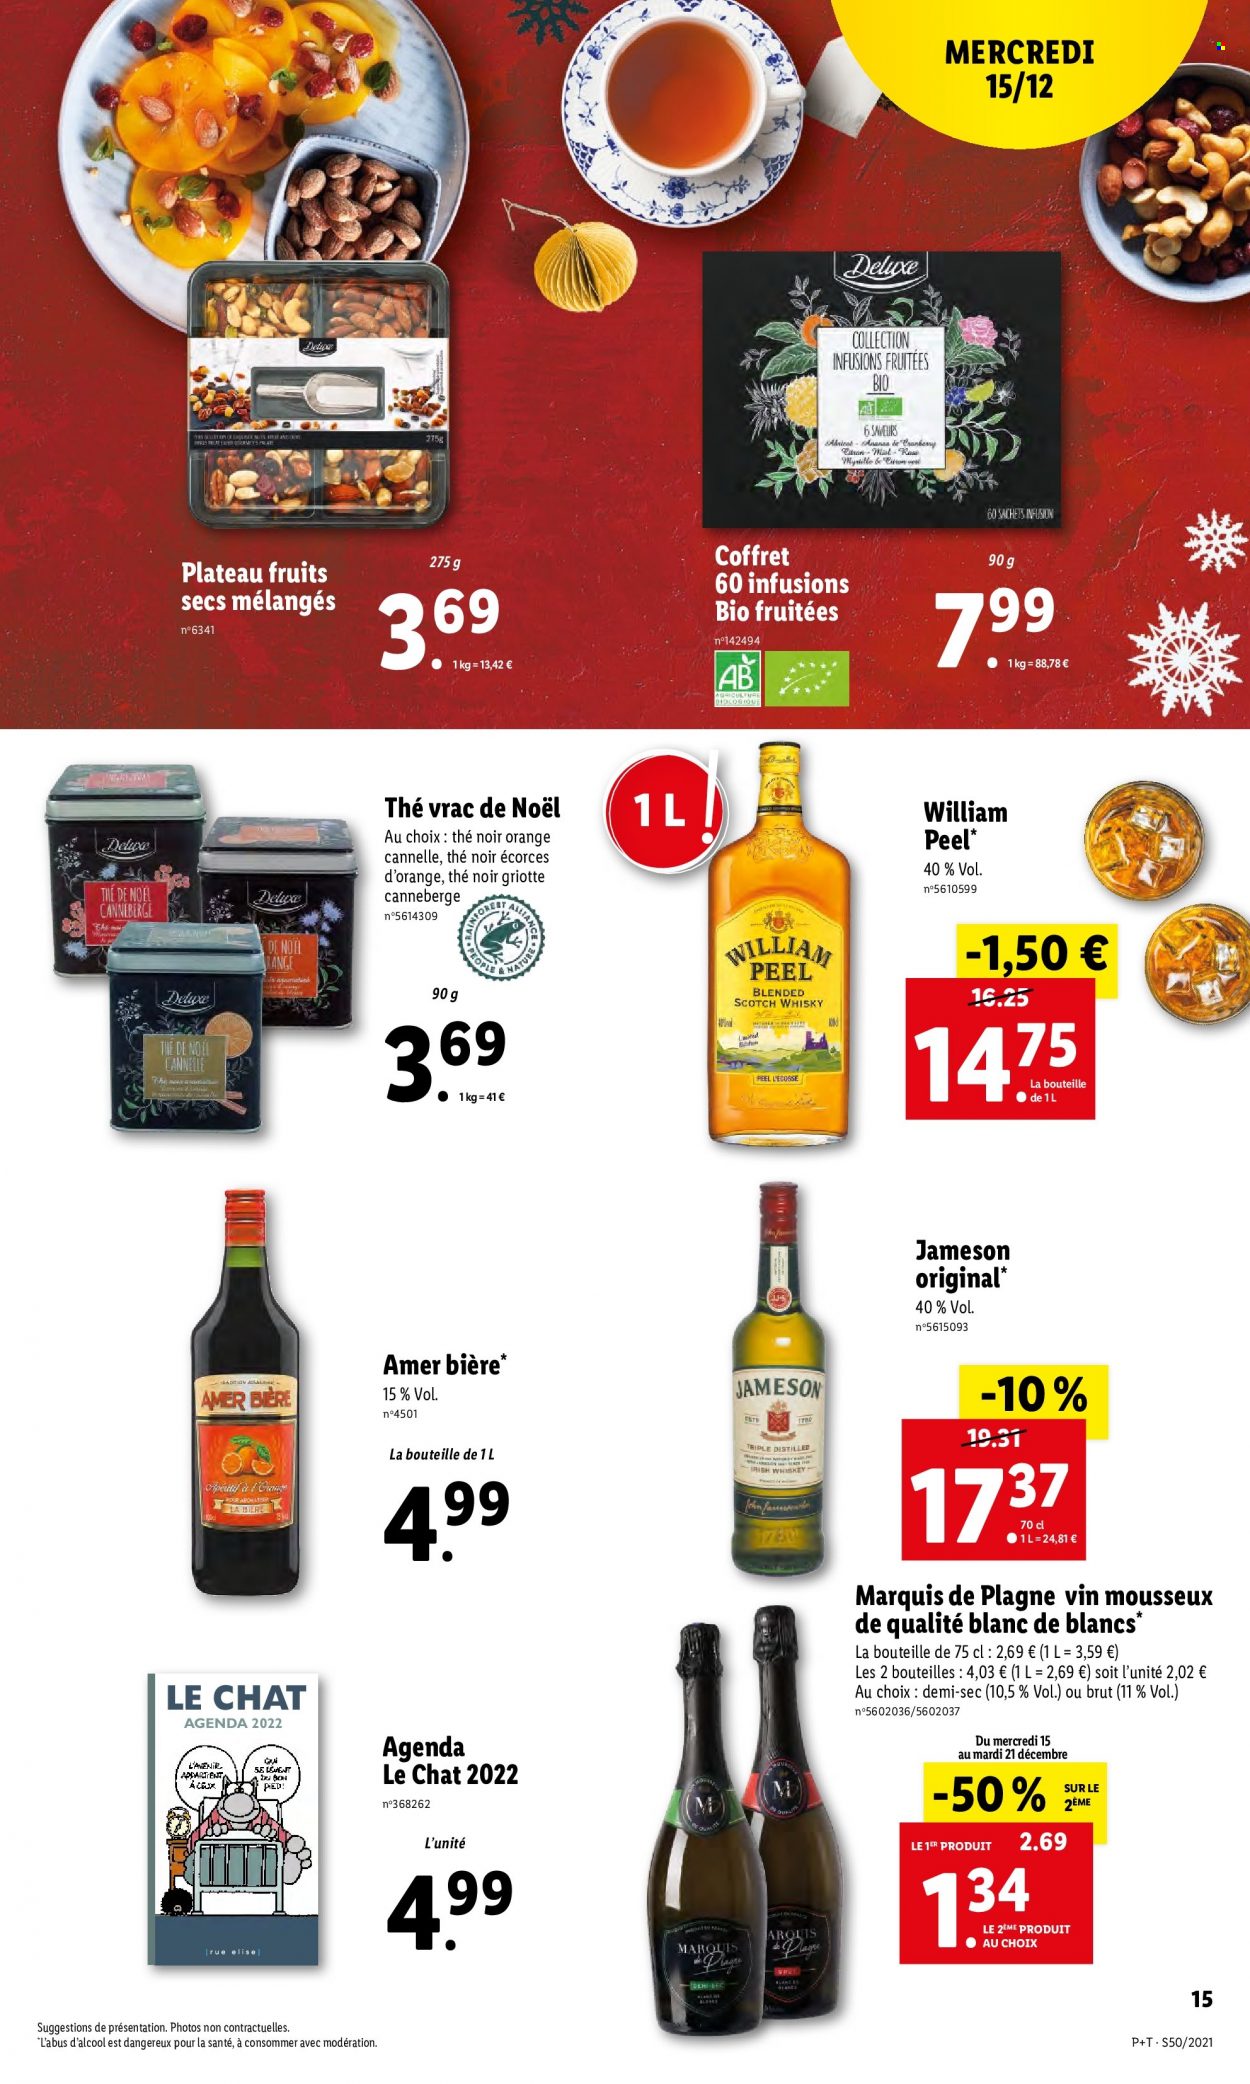 Catalogue Lidl - 15.12.2021 - 21.12.2021. Page 15.